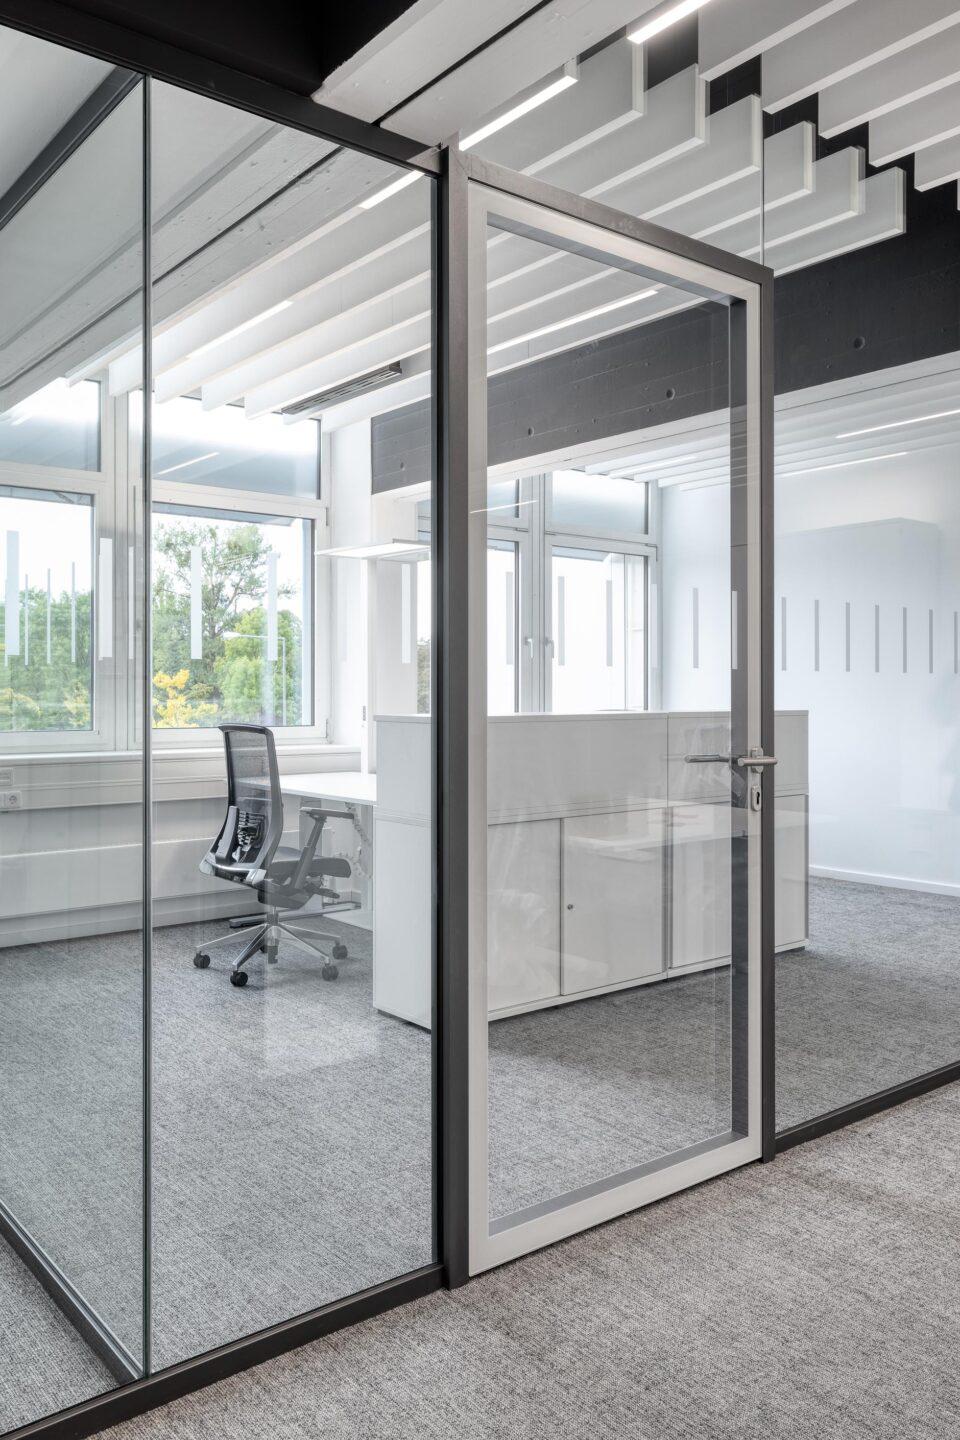 feco partition wall systems │ glass walls and doors creating a baffling design